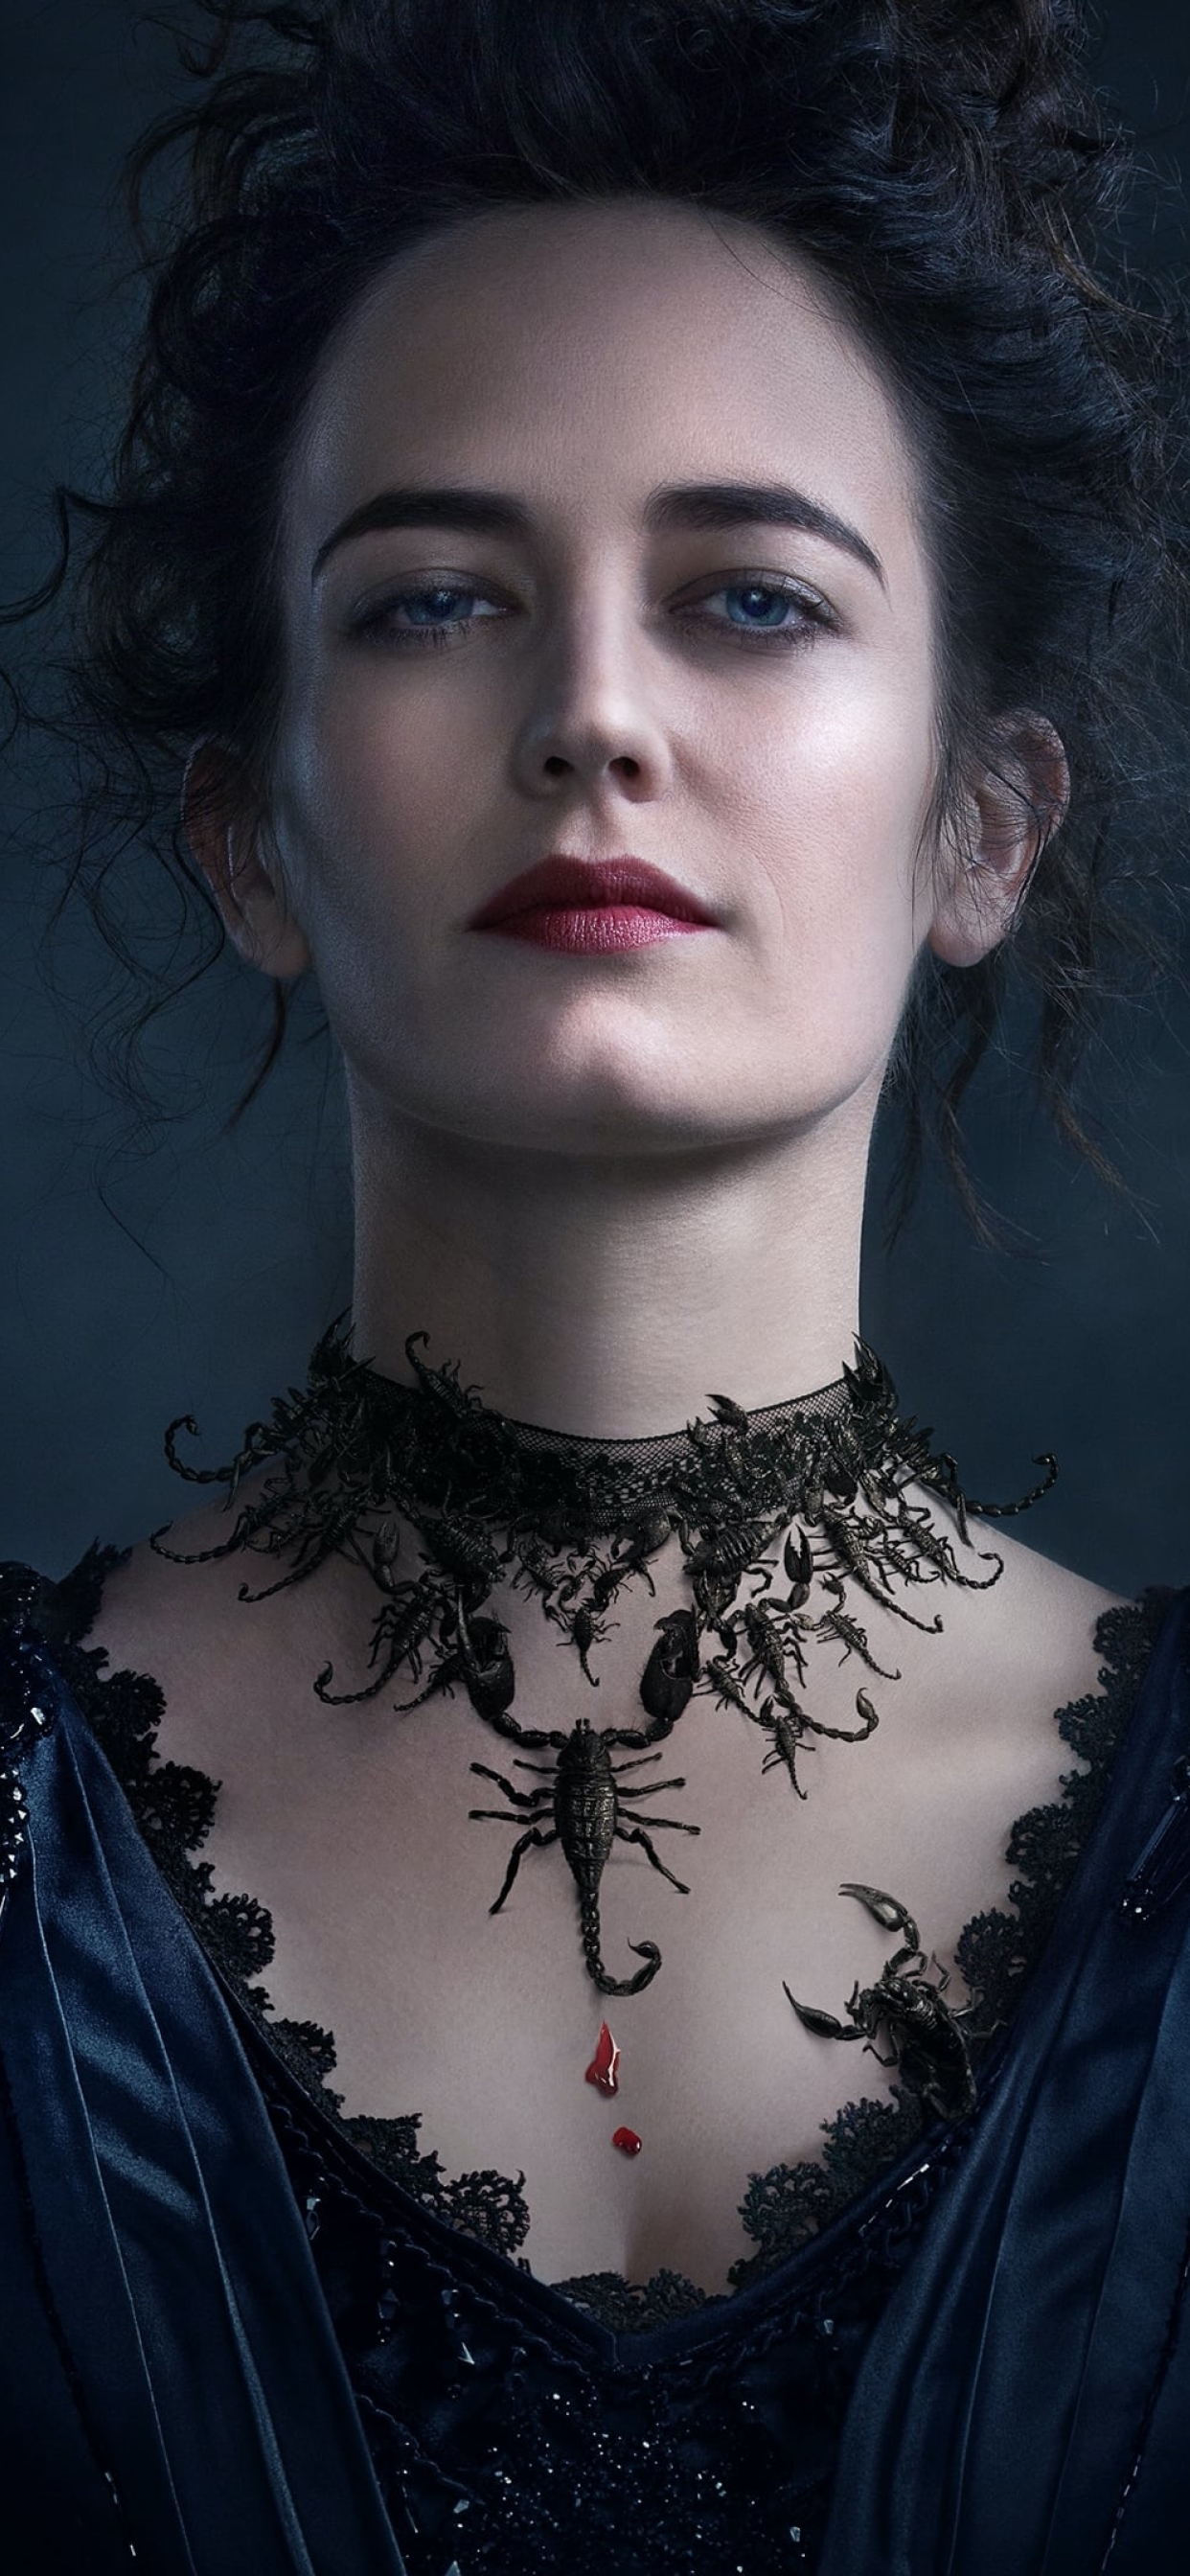 1242x26 Eva Green Penny Dreadful Iphone Xs Max Wallpaper Hd Tv Series 4k Wallpapers Images Photos And Background Wallpapers Den